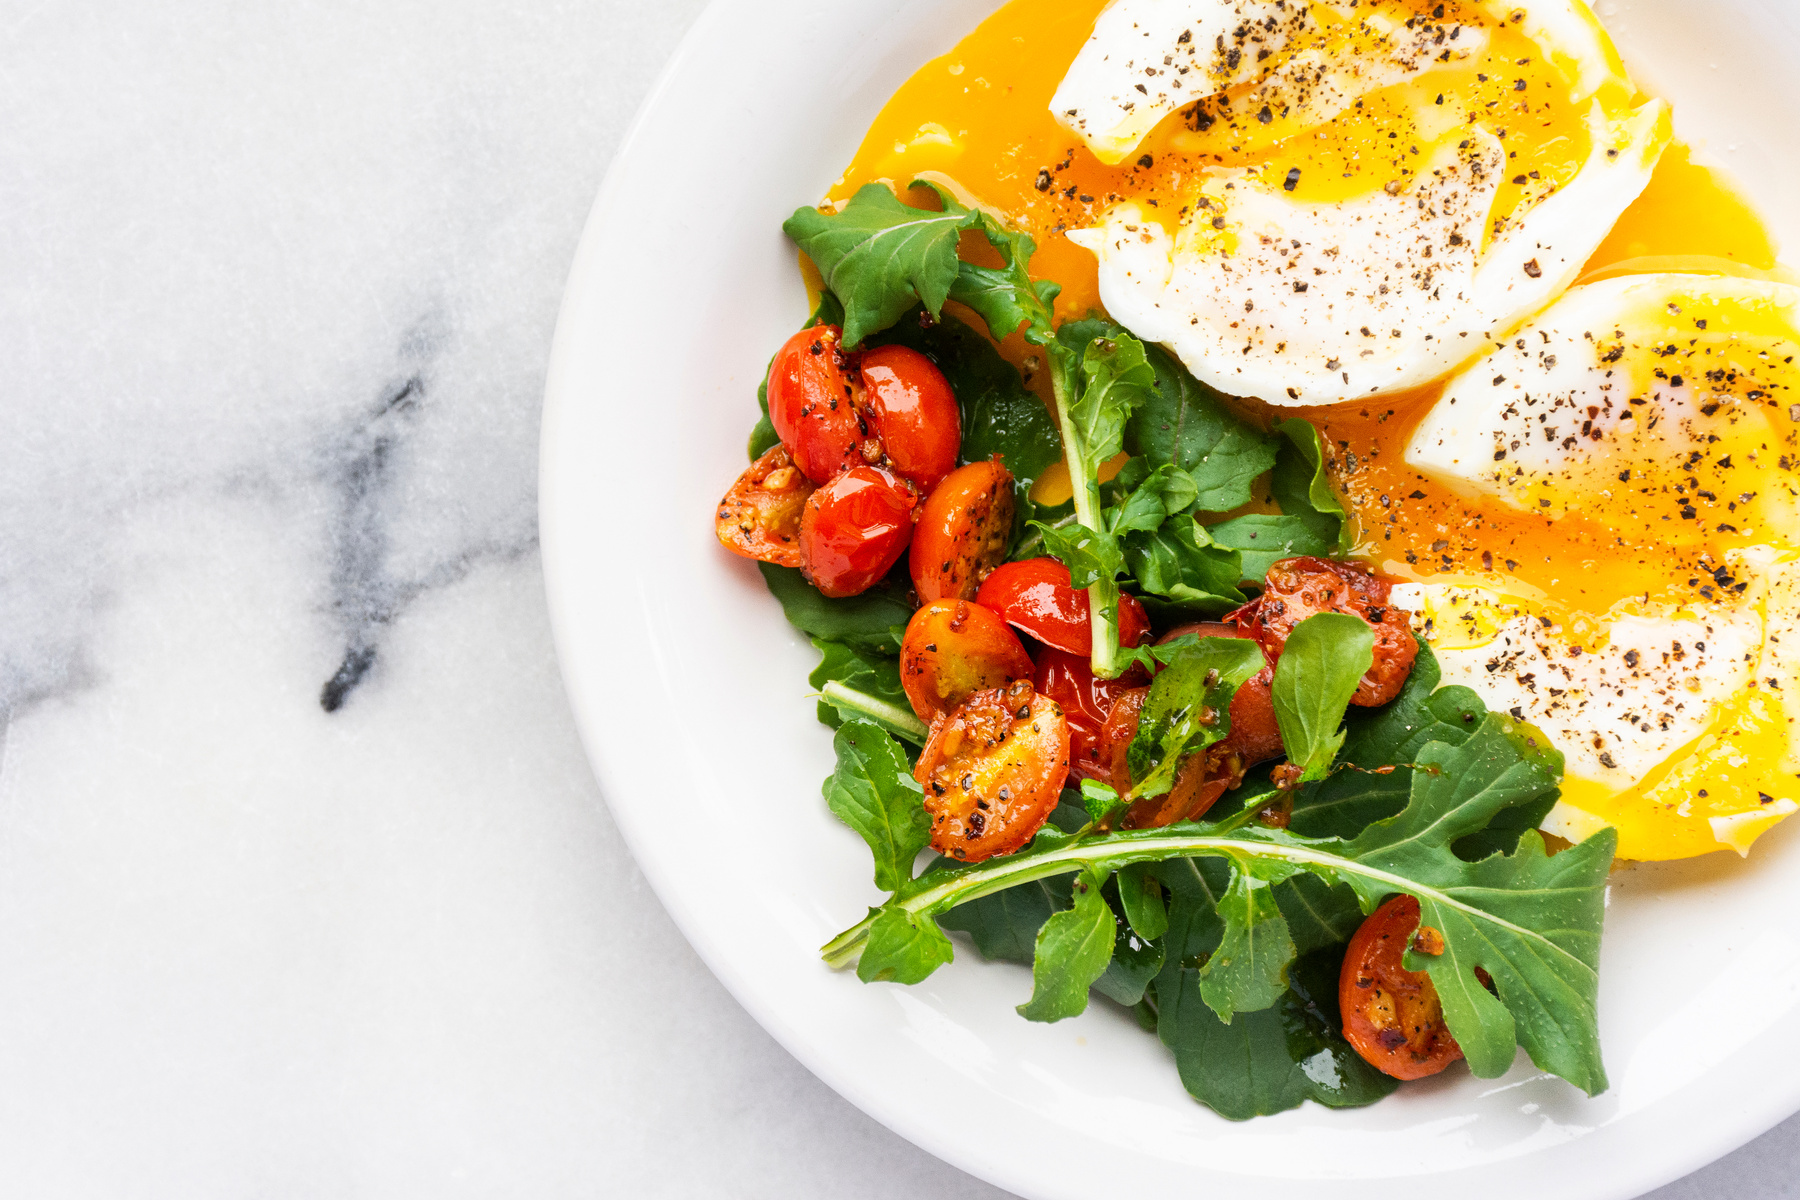 Healthy Breakfast with Vegetables and Eggs on a Plate